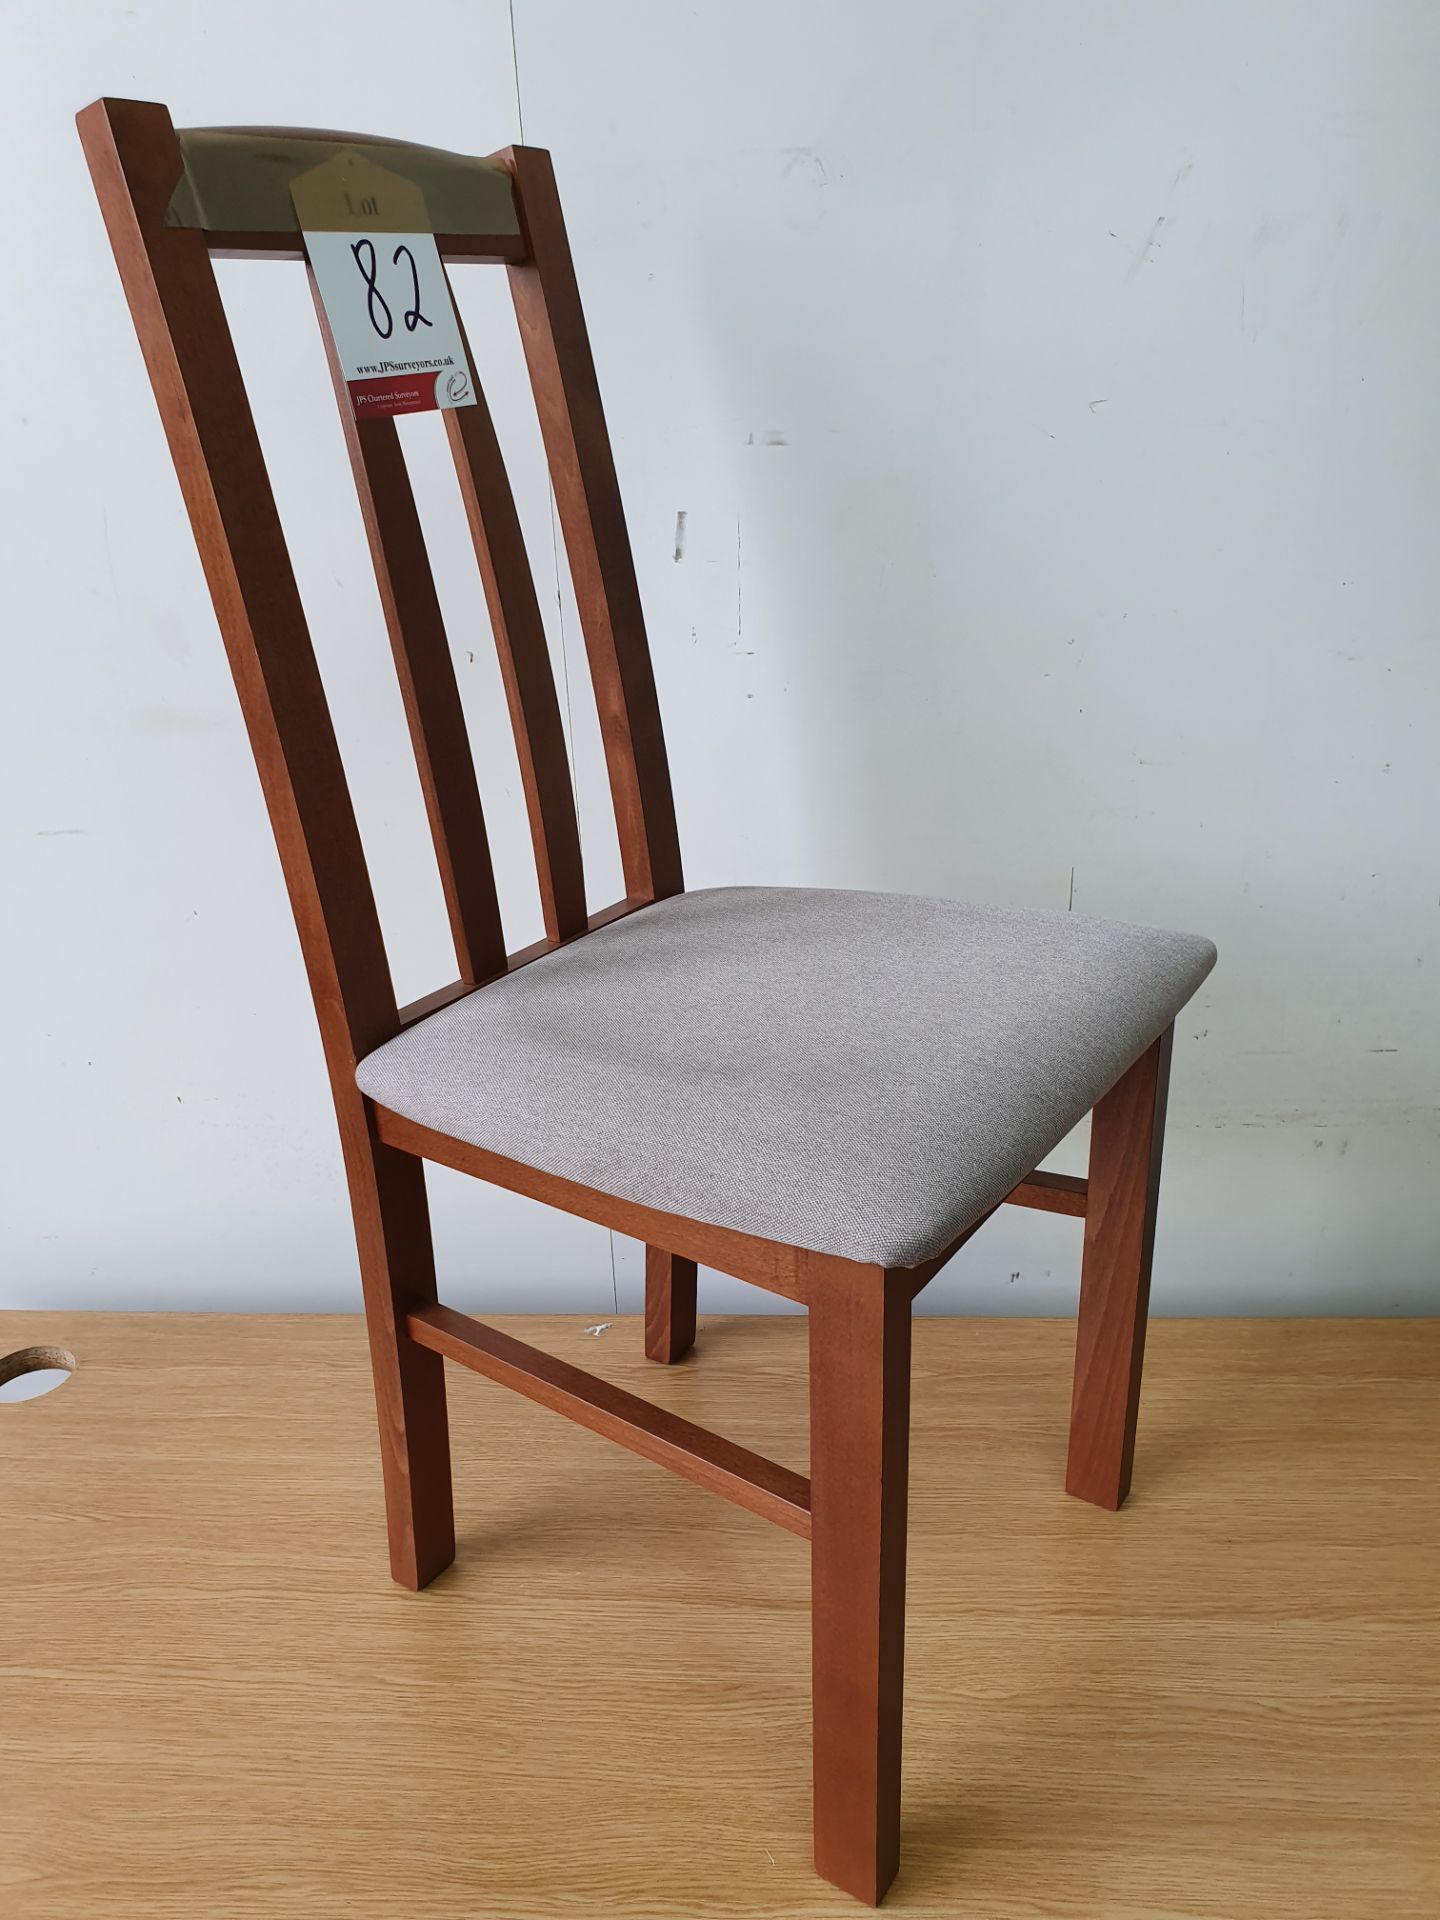 Wooden Dining Chair - Image 2 of 2